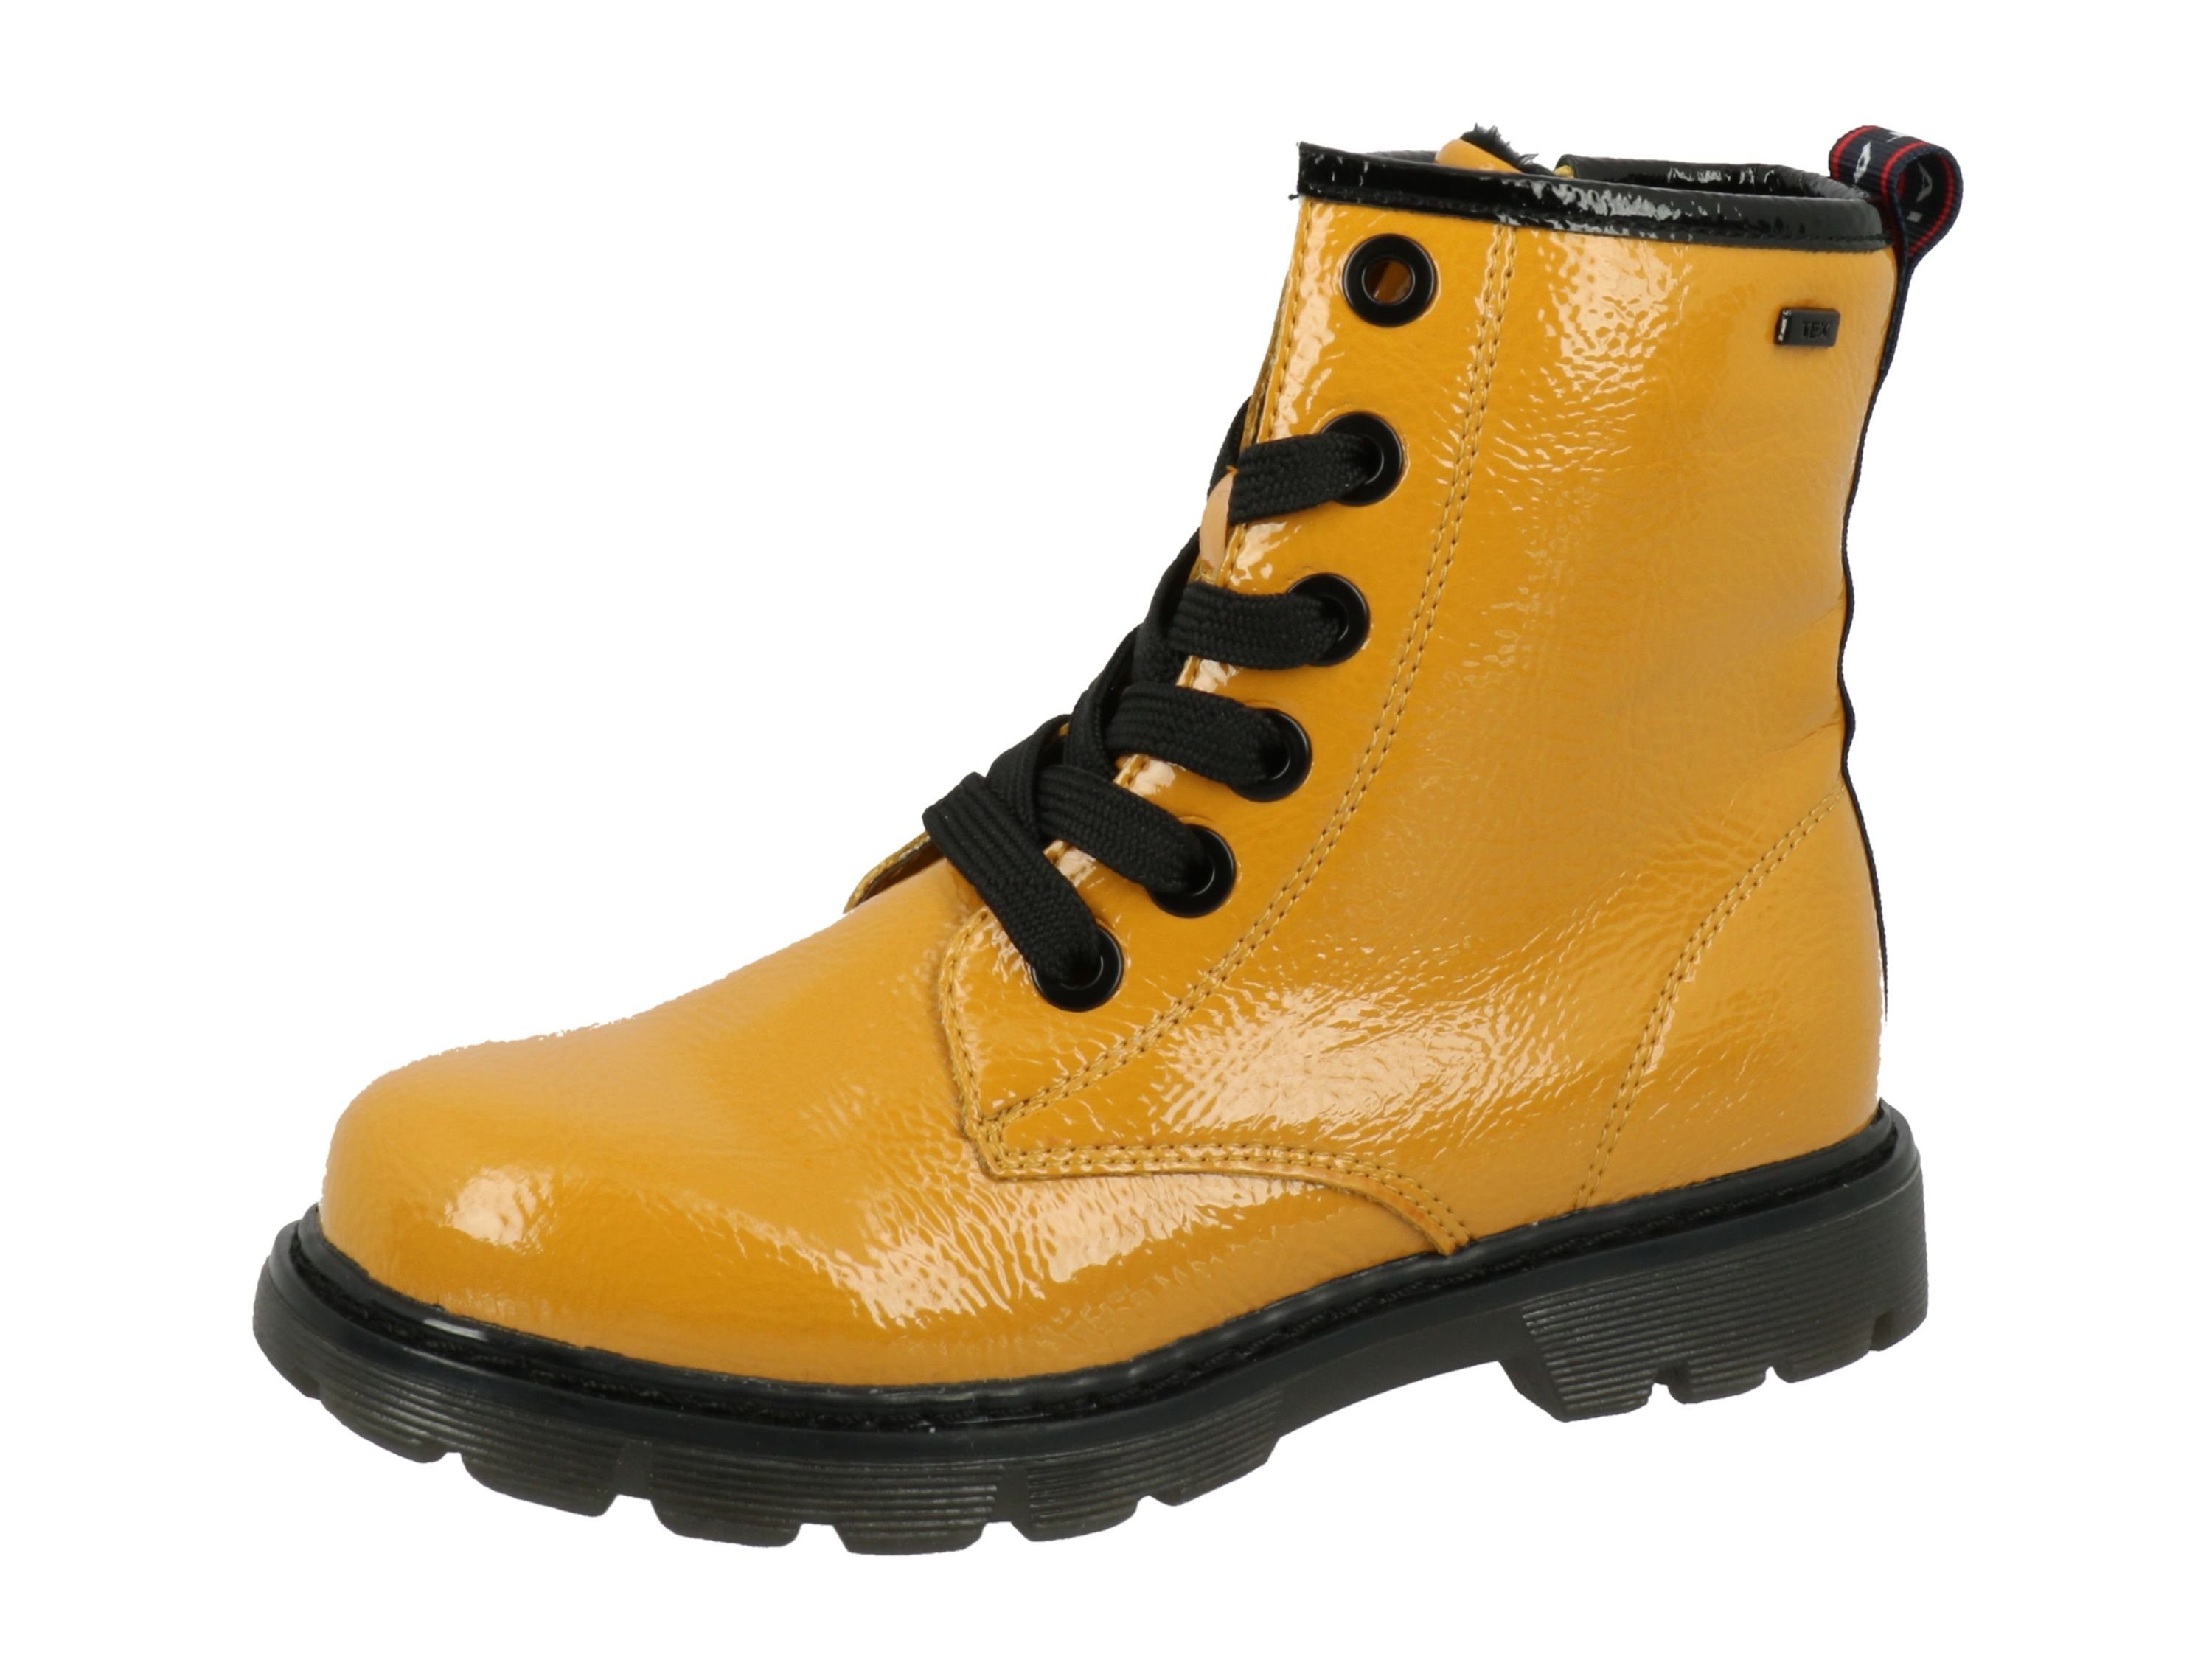 TOM TAILOR Tom Tailor Kinder 2171602 Stiefel mit Warmfutter Stiefel yellow